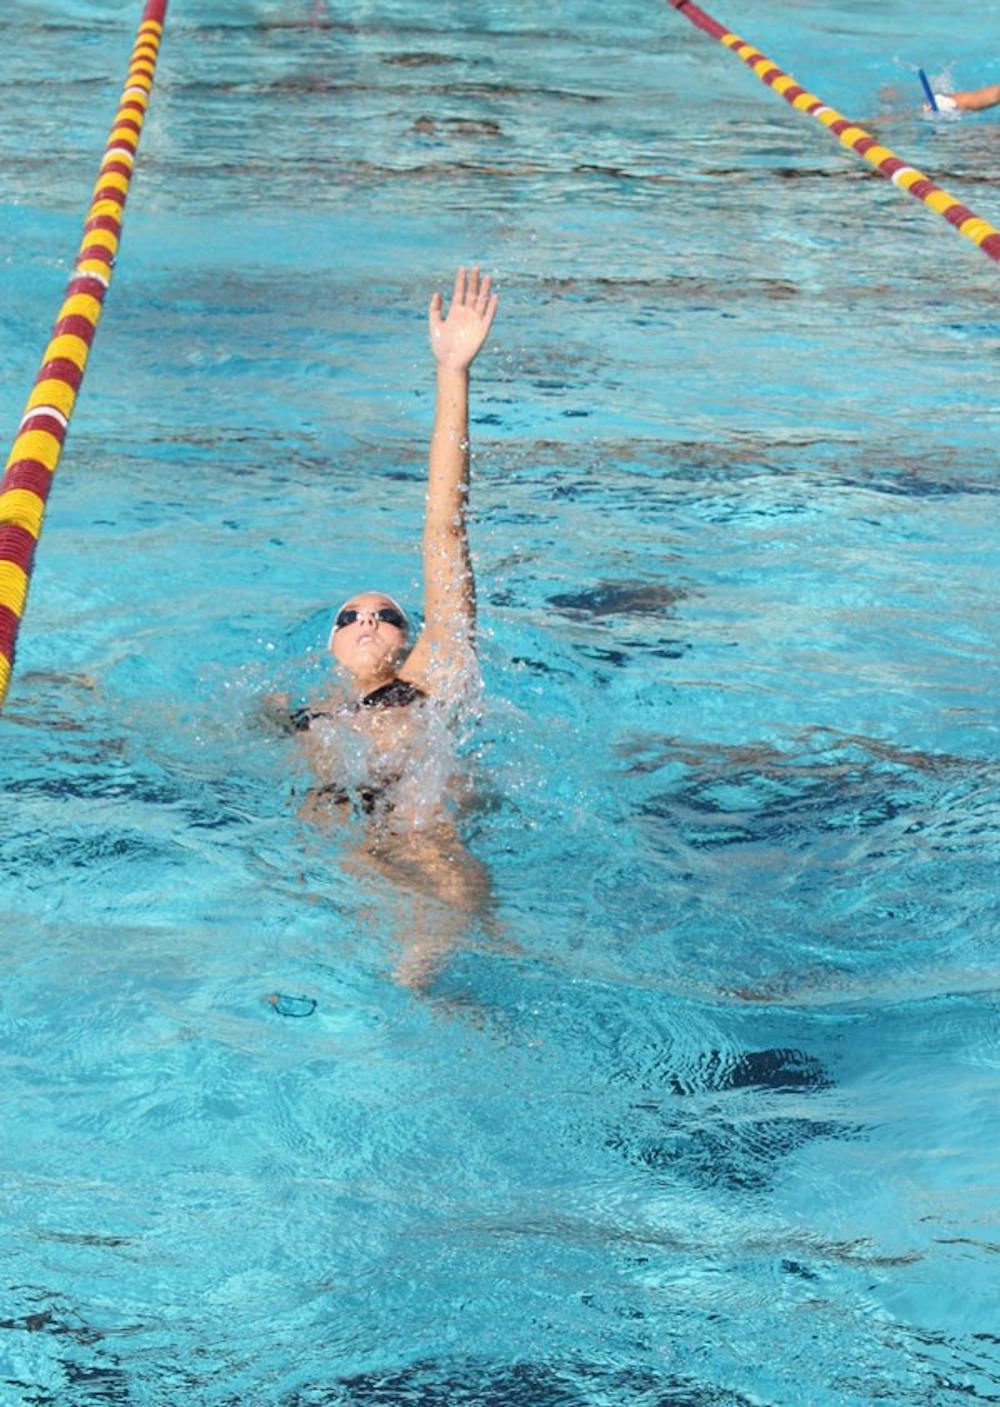 CHAMPIONSHIP FORM: The ASU women’s swimming and diving team finished 22nd at the NCAA Championships in West Lafayette, Ind. over the weekend. Sophomore diver Elina Eggers and sophomore swimmer Rebecca Ejdervik earned All-America honors.(Photo by Jessica Weisel)